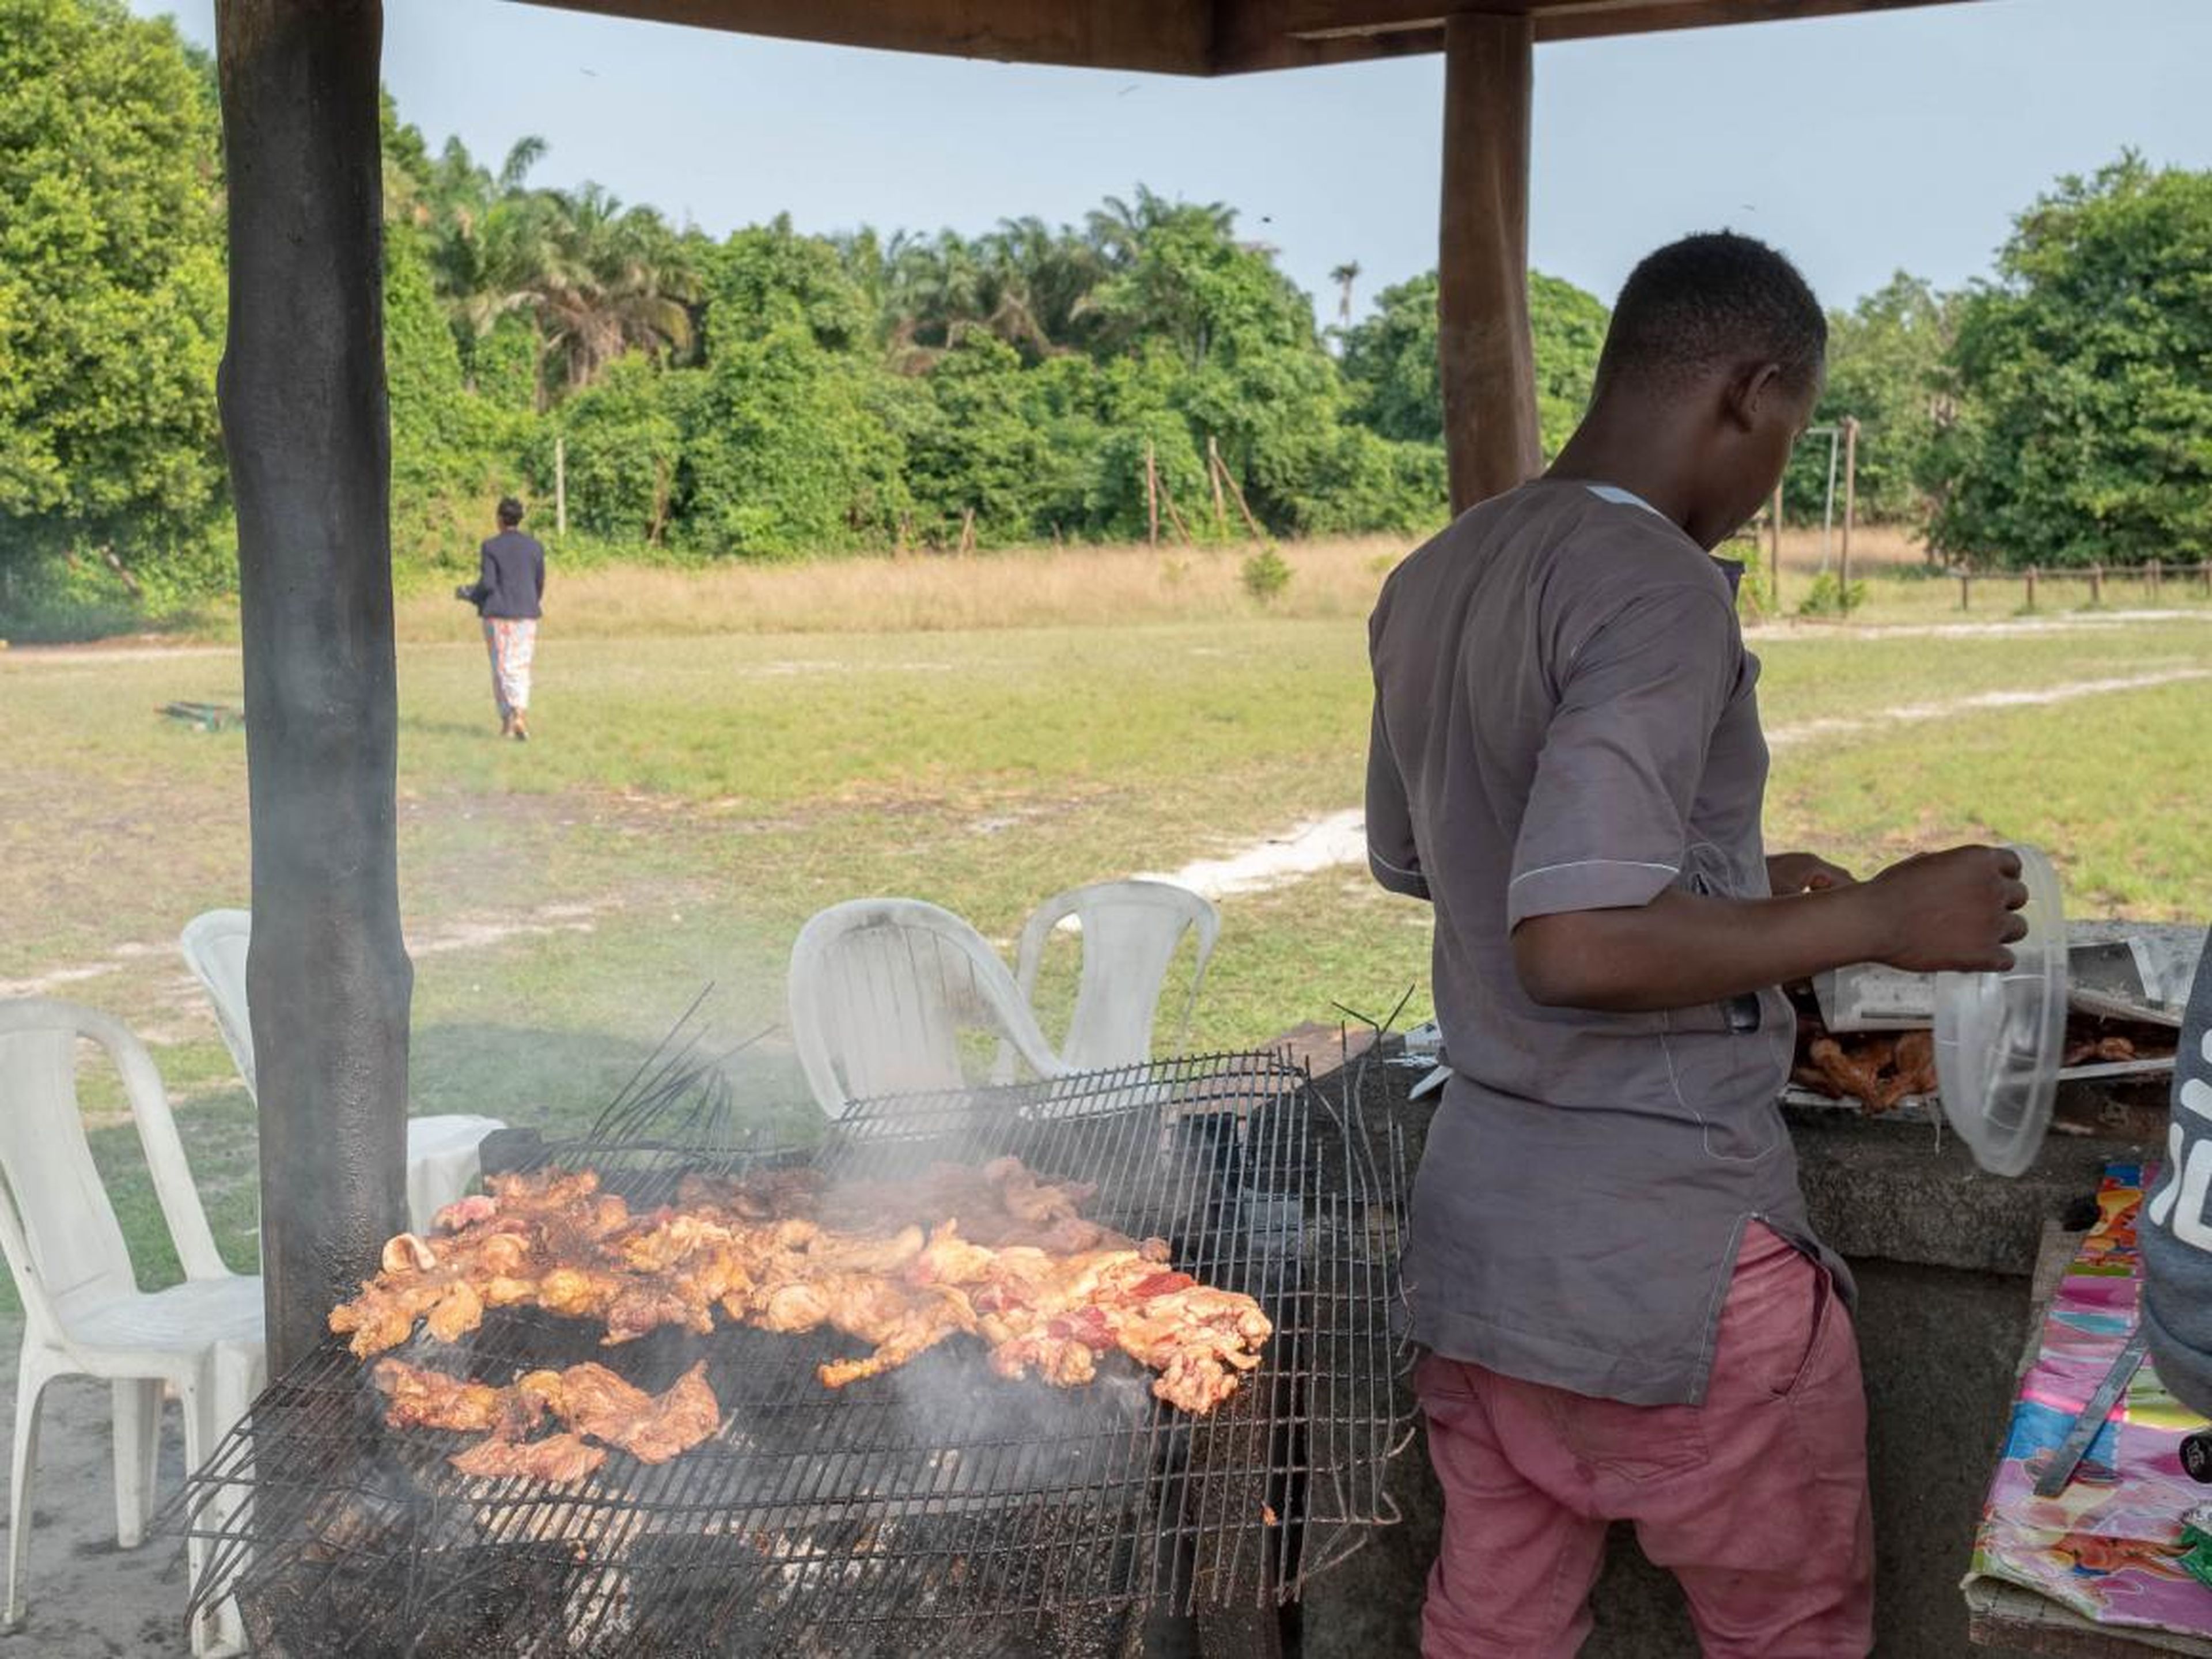 It's also one of the best places to see how Lagosians relax and blow off steam. There is a large family park attached with picnic areas, floor games, and a canopy walkway. The suya, or traditional Nigerian barbecue, served up at